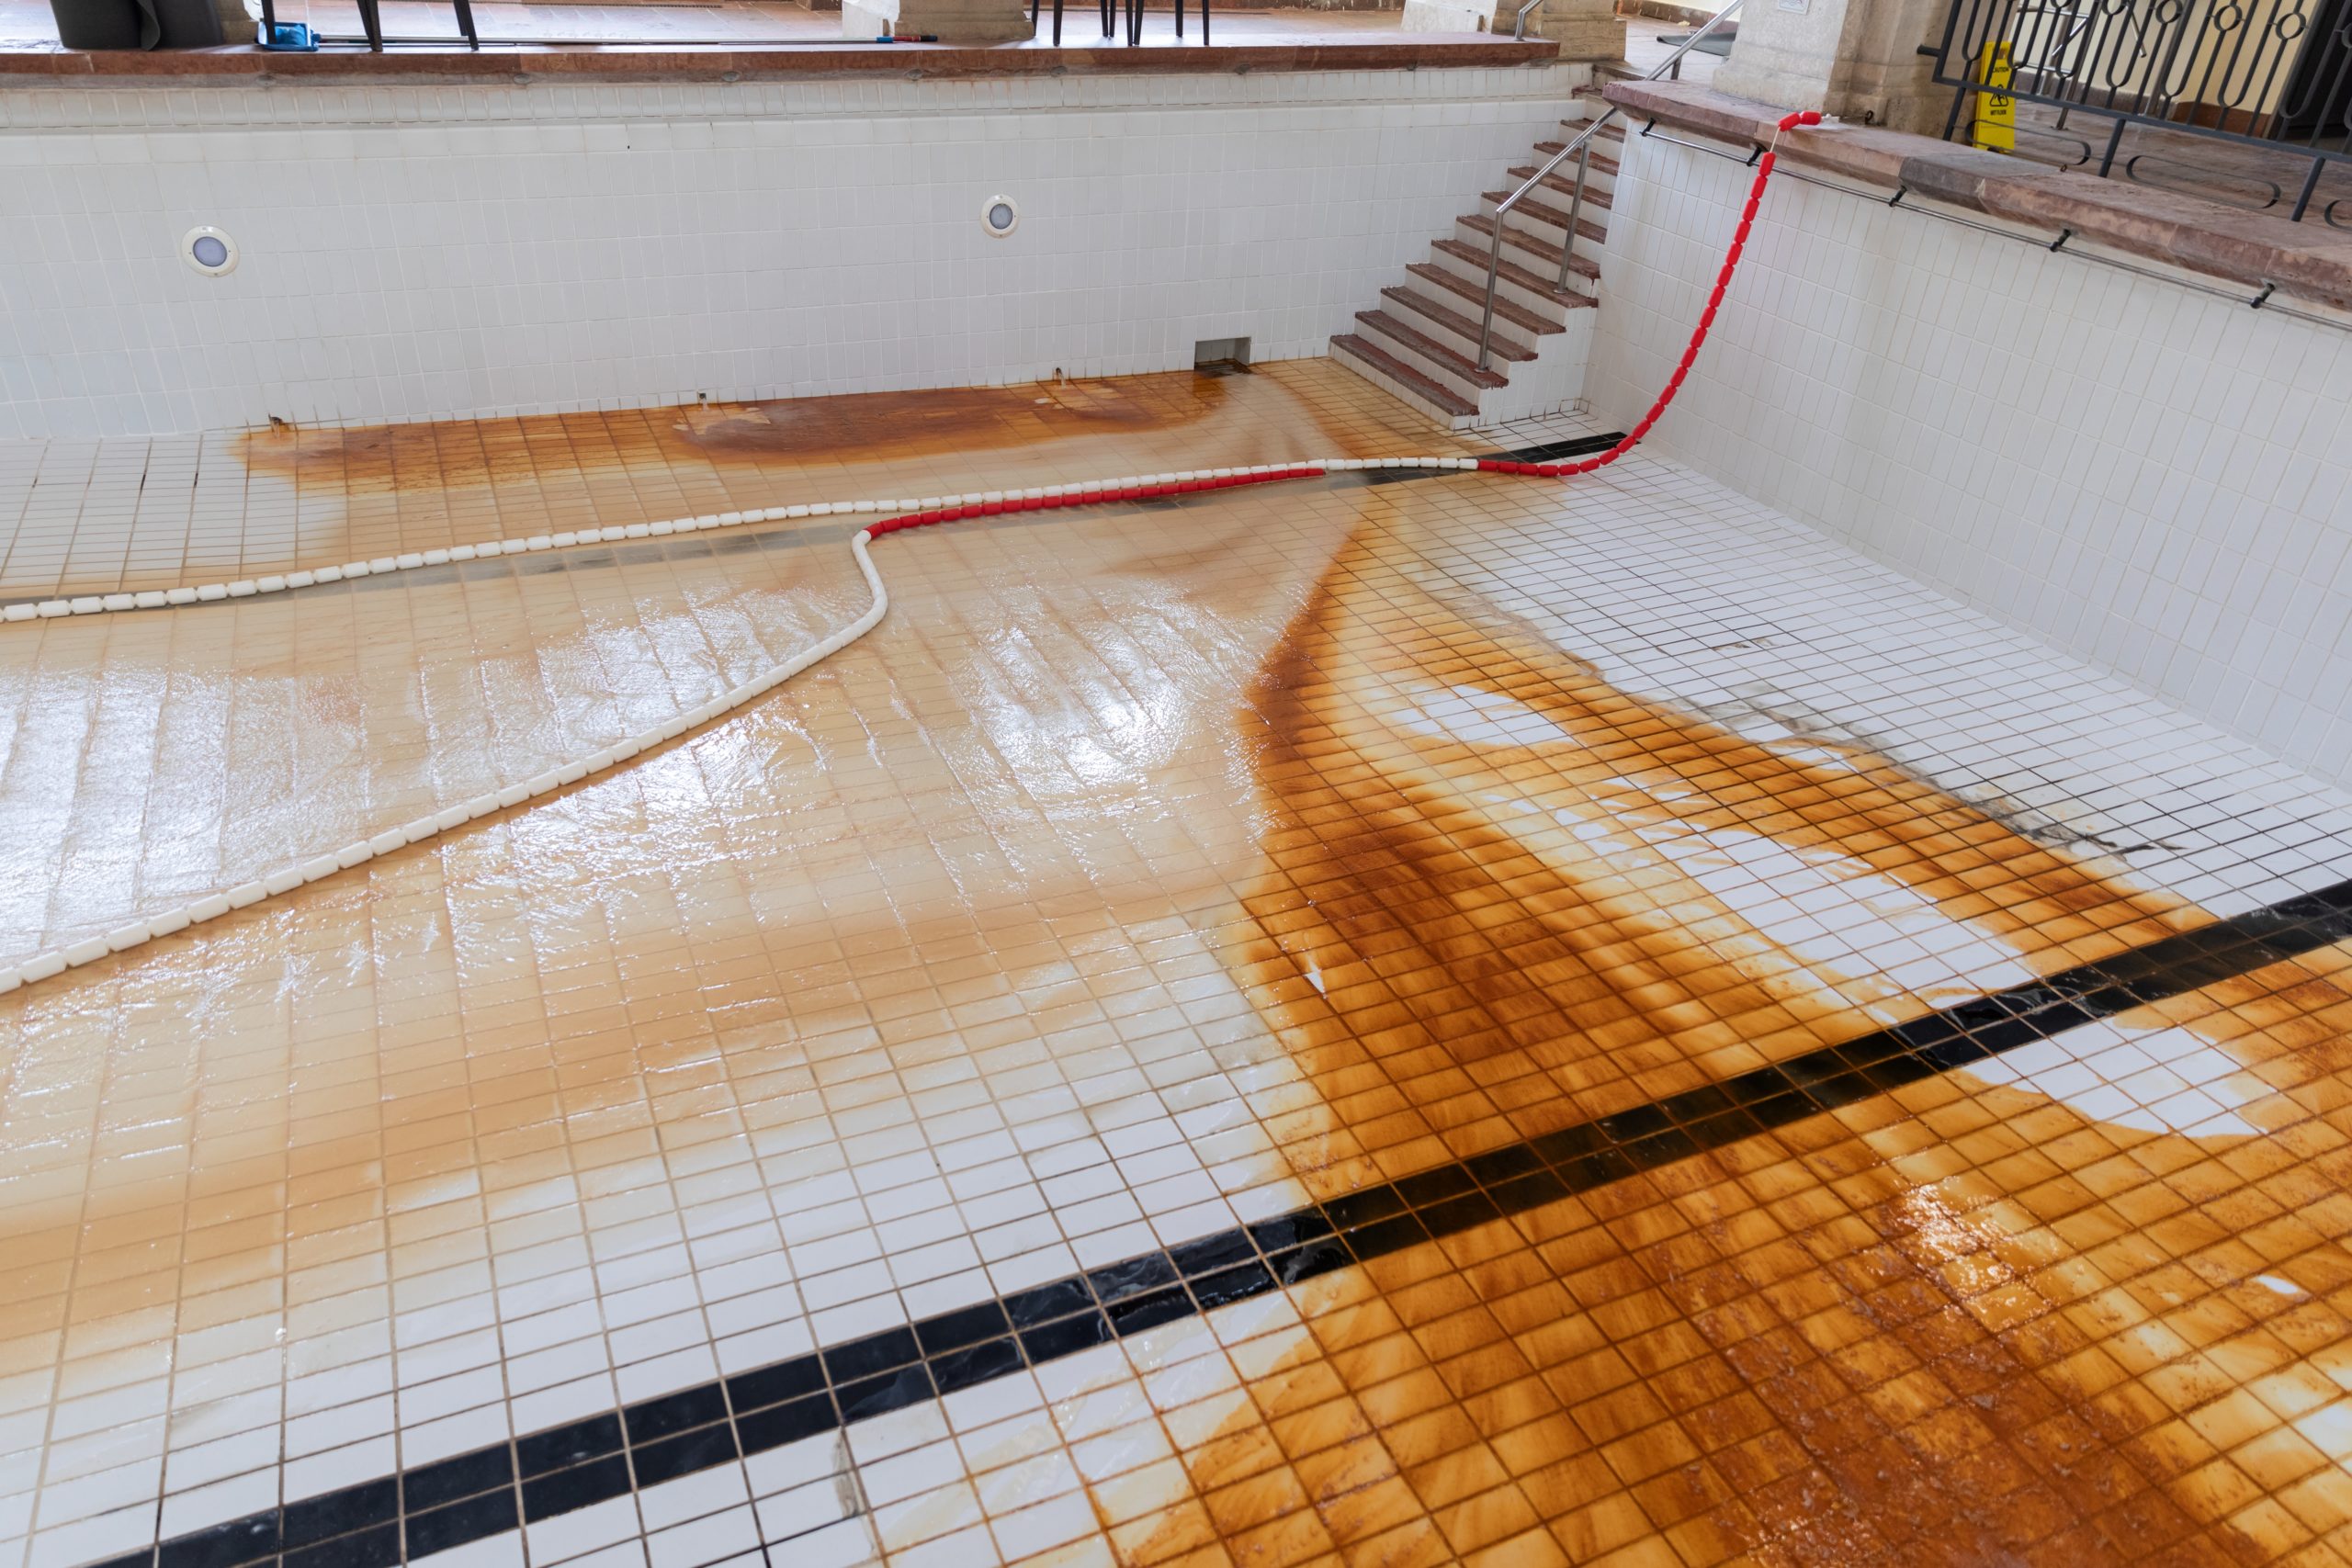 Pool stains, discolorations or markings on the surface of a pool often caused by various factors such as minerals, organic matter, or chemical imbalances, which can affect the pool's appearance and may require treatment or maintenance.